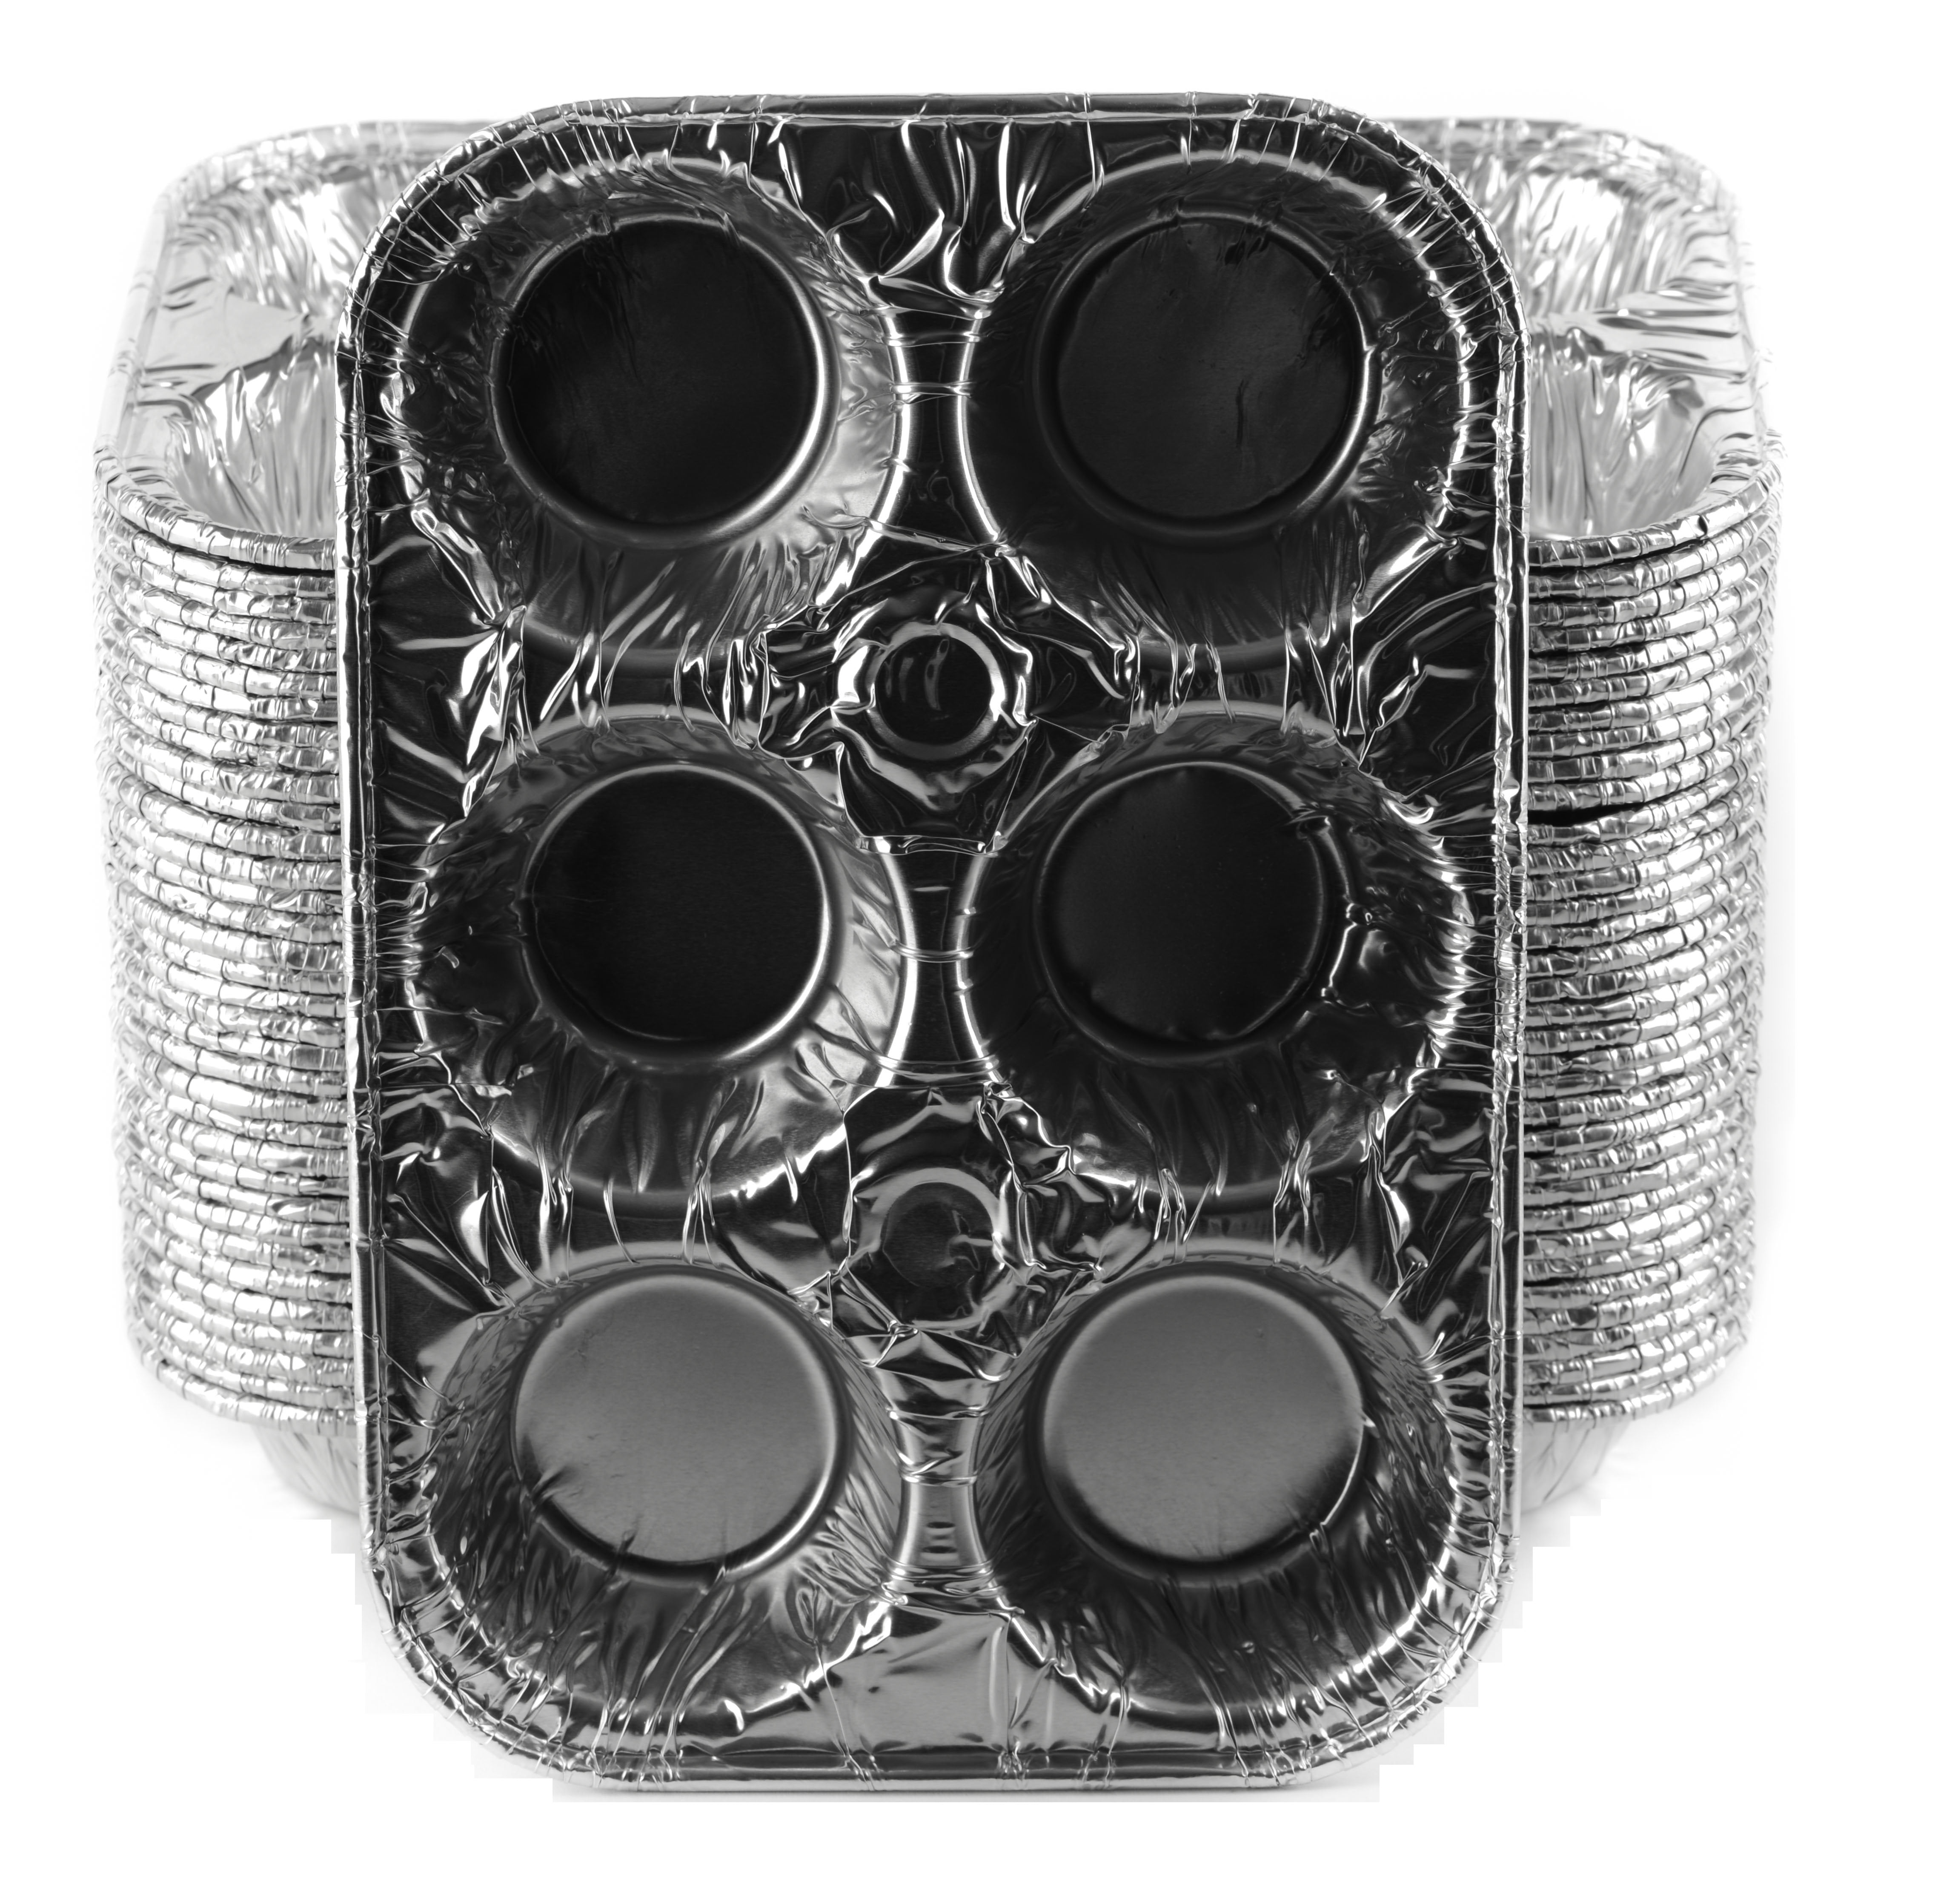 Pastry Tek Silver Aluminum Cupcake / Muffin Pan - 6-Compartment - 9 1/2 inch x 6 1/2 inch x 1 1/2 inch - 25 Count Box, Size: 9.5 in